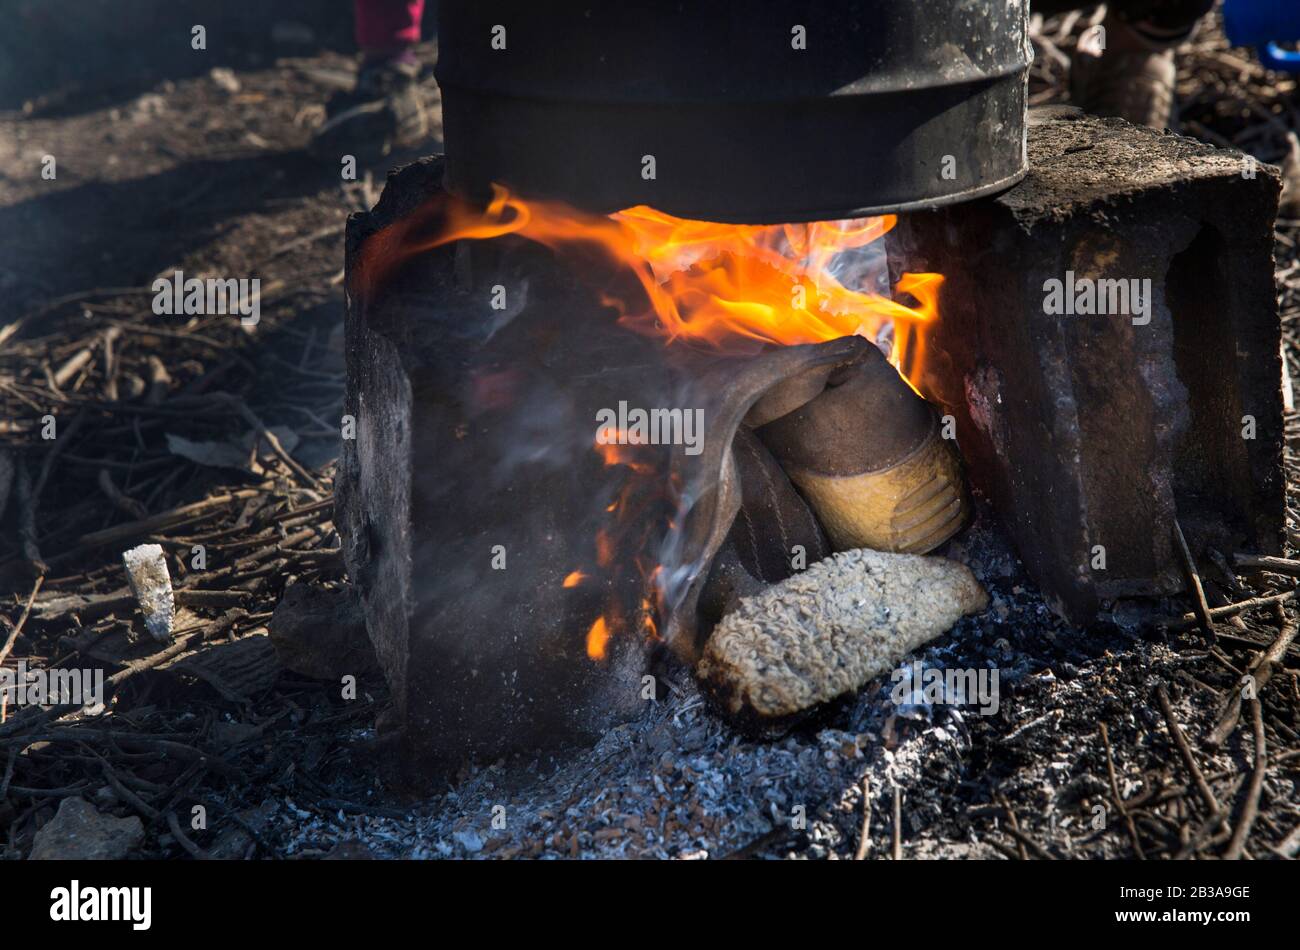 March 2, 2020, Saadnayel, Bekaa Valley, Lebanon: Old shoes are burn to heat  water to wash with outside of Mohamad Shehab Camp, an informal Syrian  refugee settlement located in the Bekaa Valley,